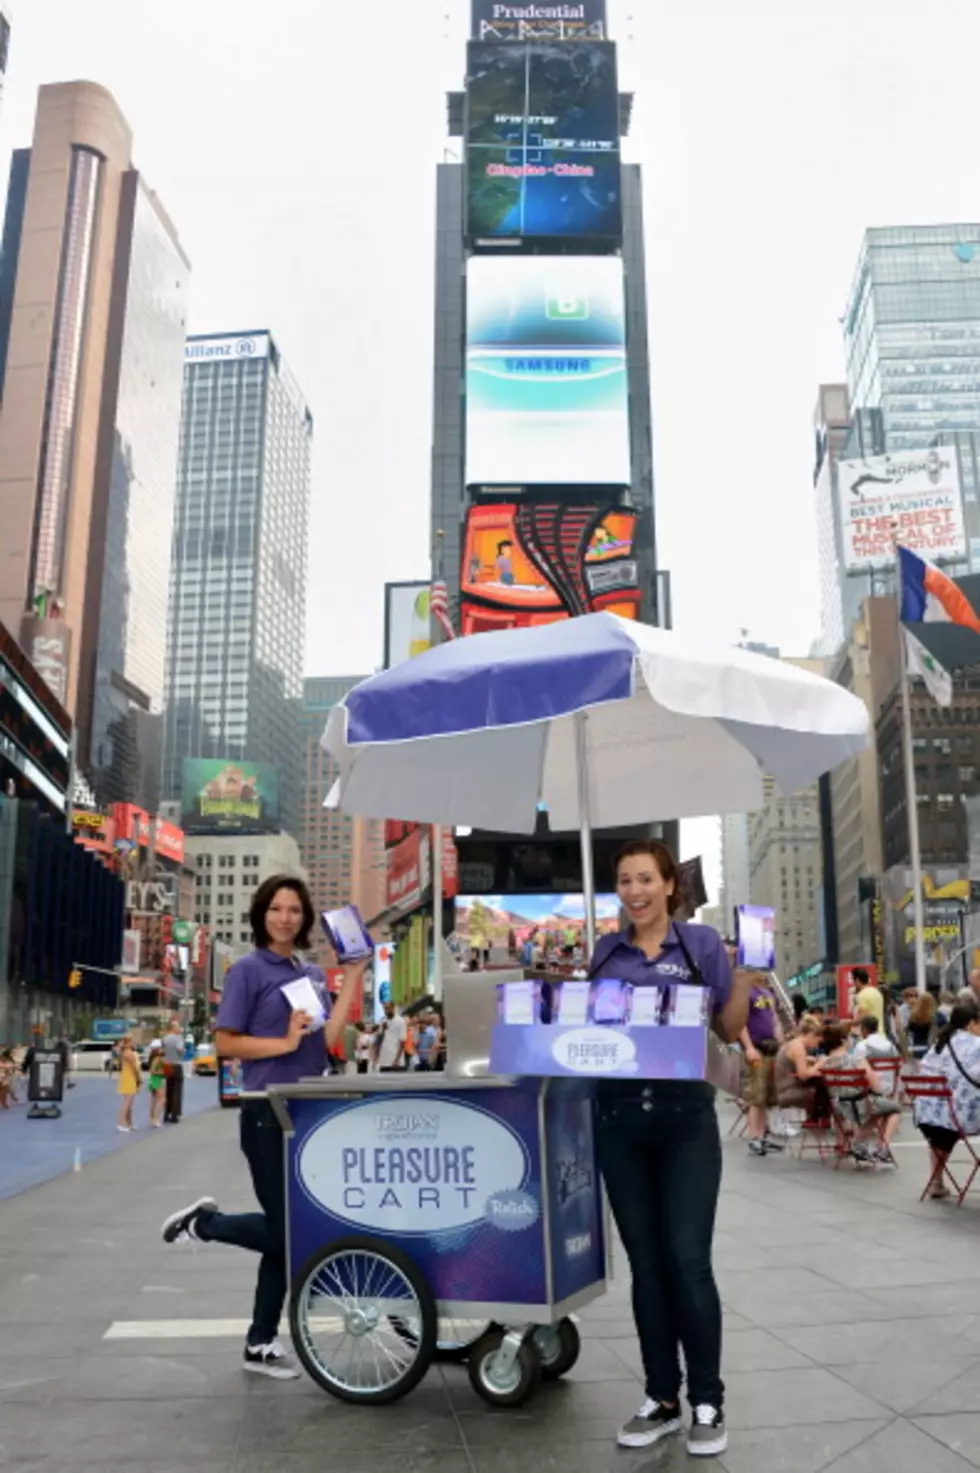 Vibrator Giveaway In New York City Gets Shut Down